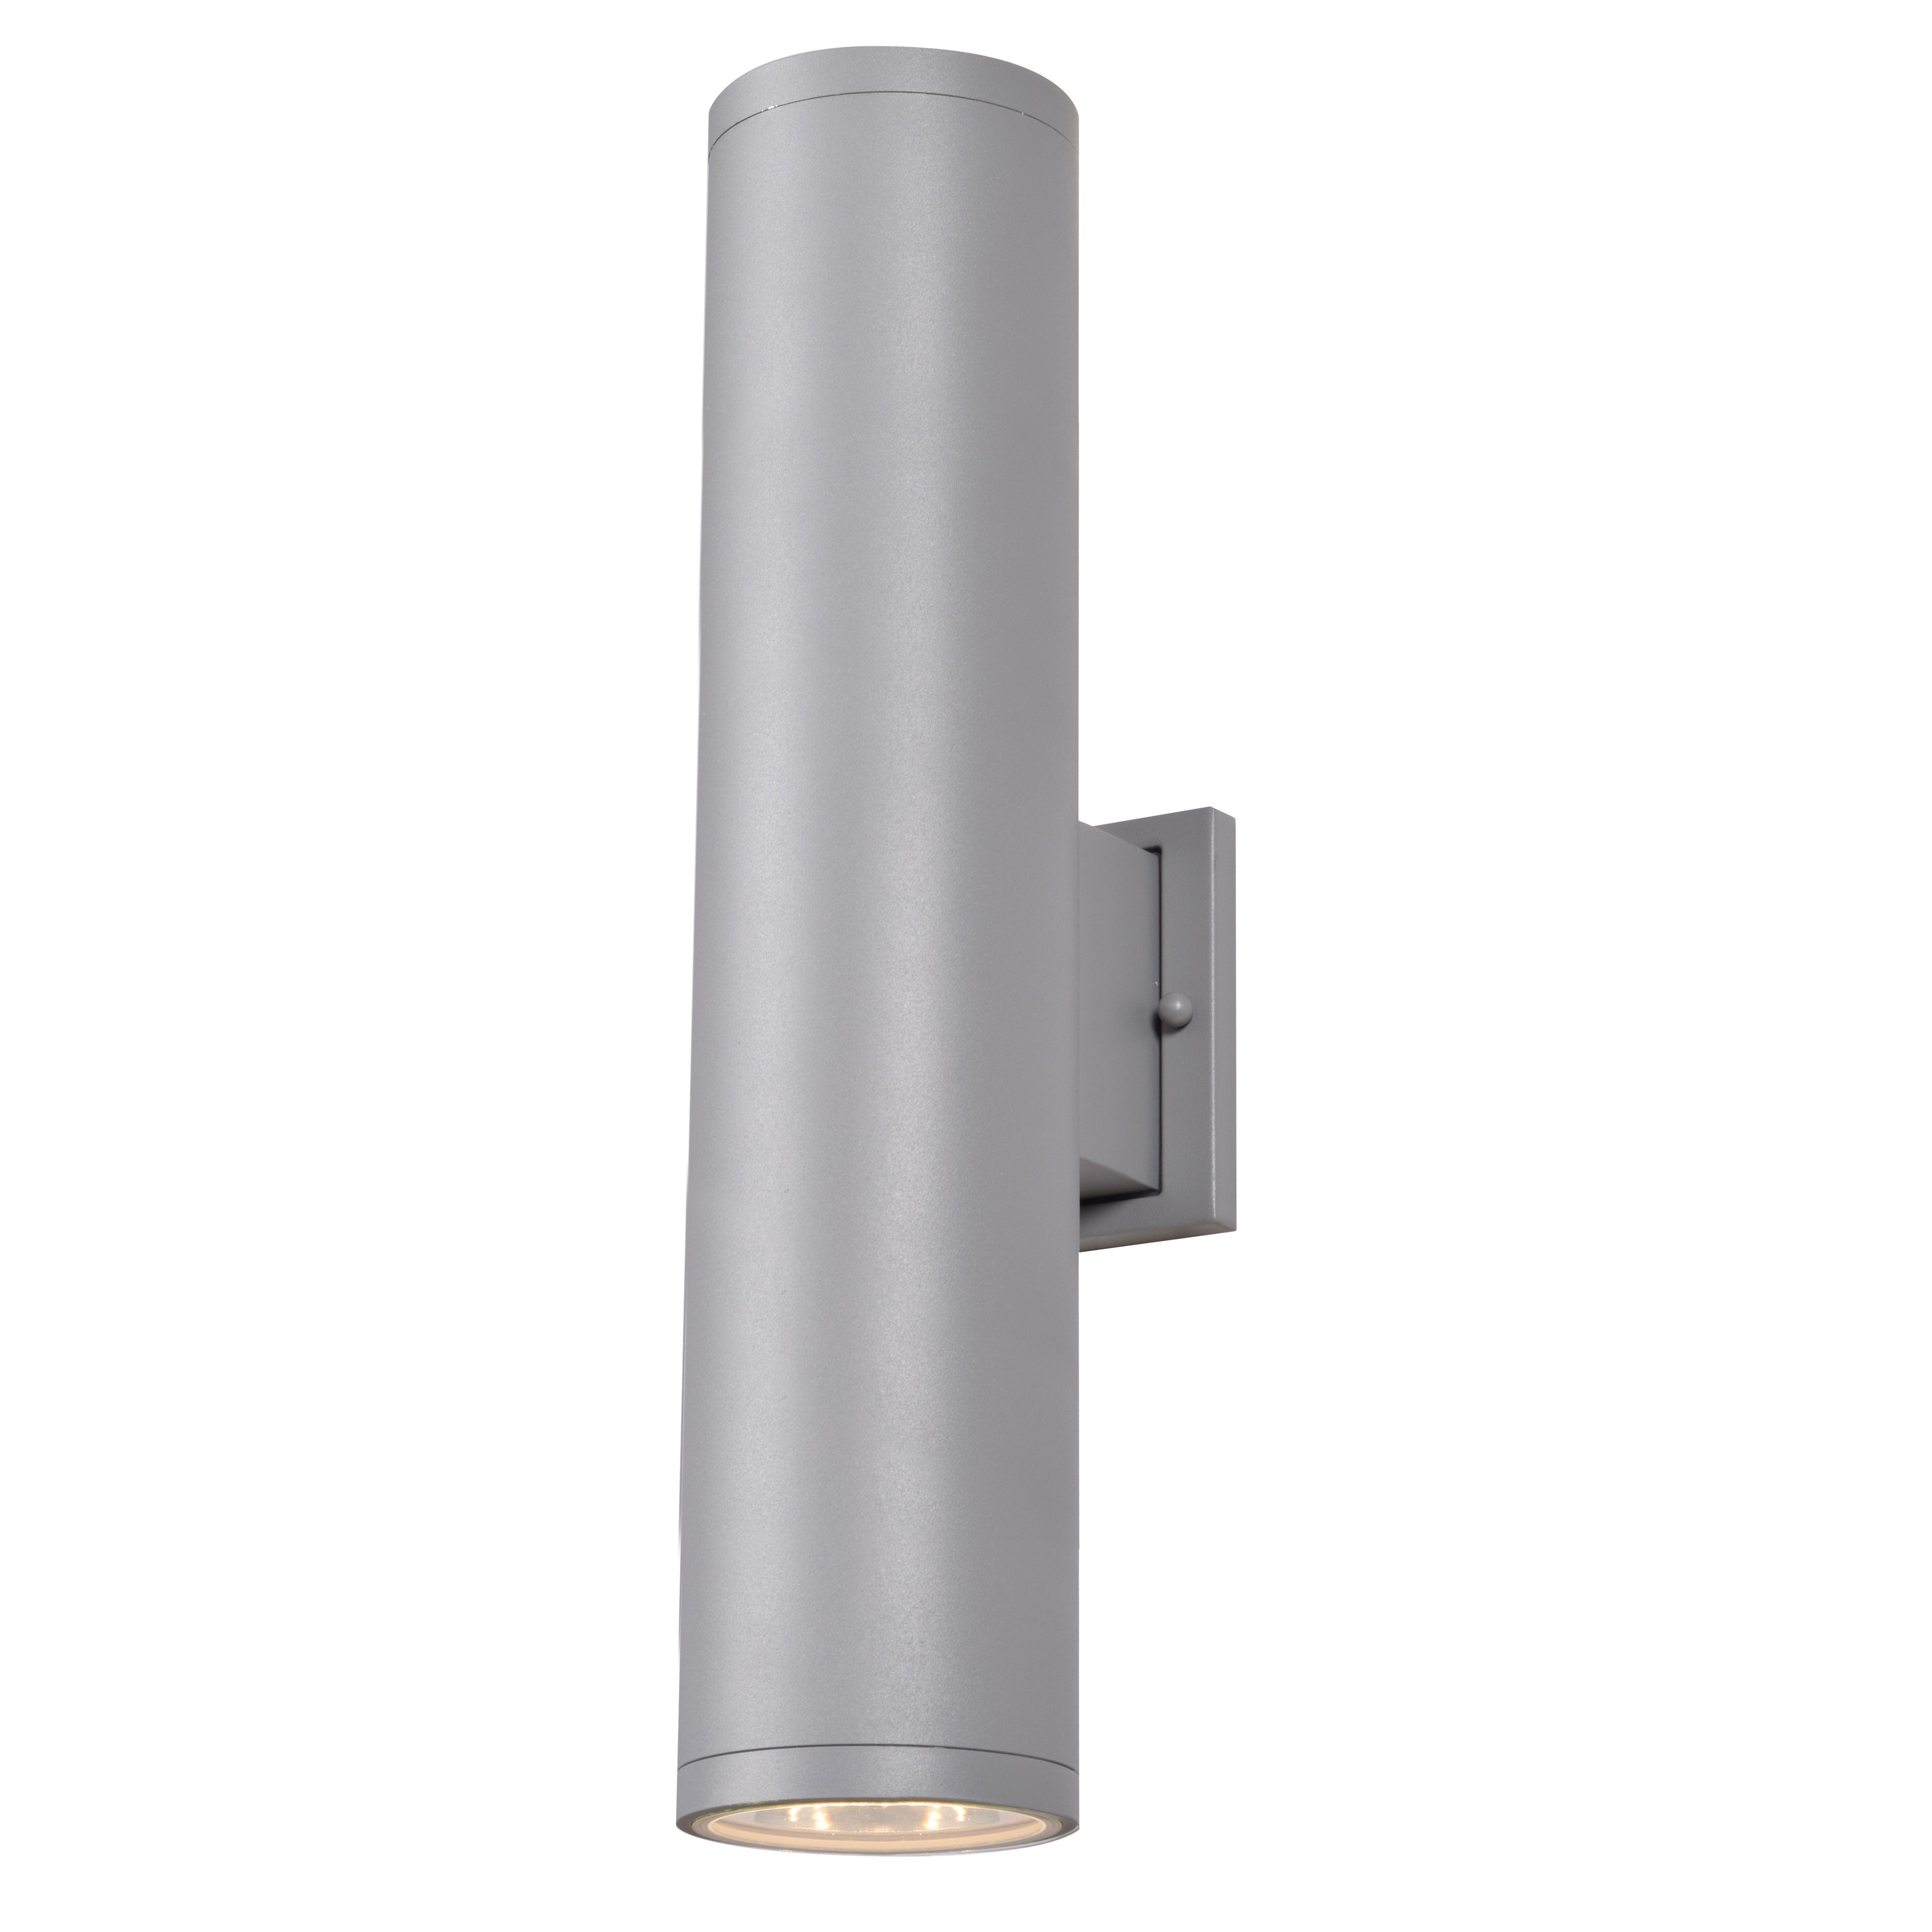 Sandpiper XL Bi-Directional Outdoor LED Wall Mount Sconce Light